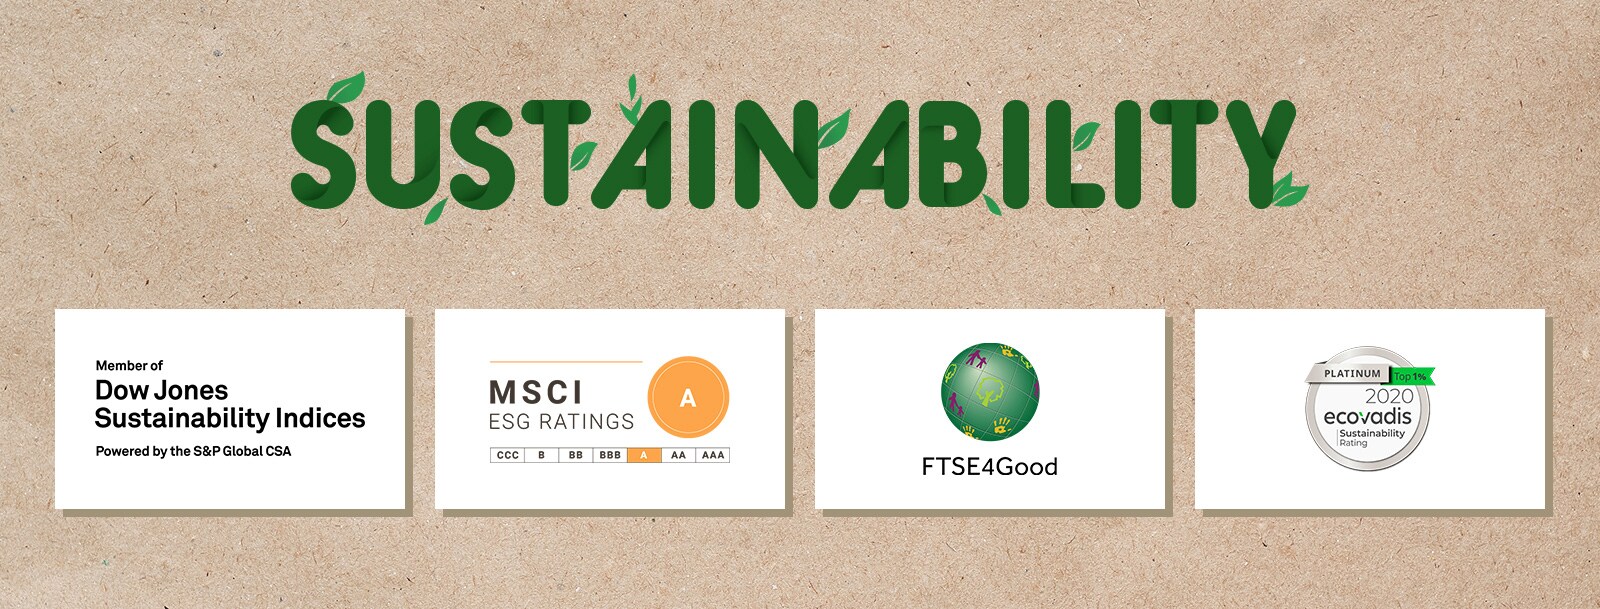 A logo of Dow Jones Sustainability Indices. A logo of FTSE4Good. A logo of Ecovadis Sustainability Rating. A logo of MSCI ESG Ratings.